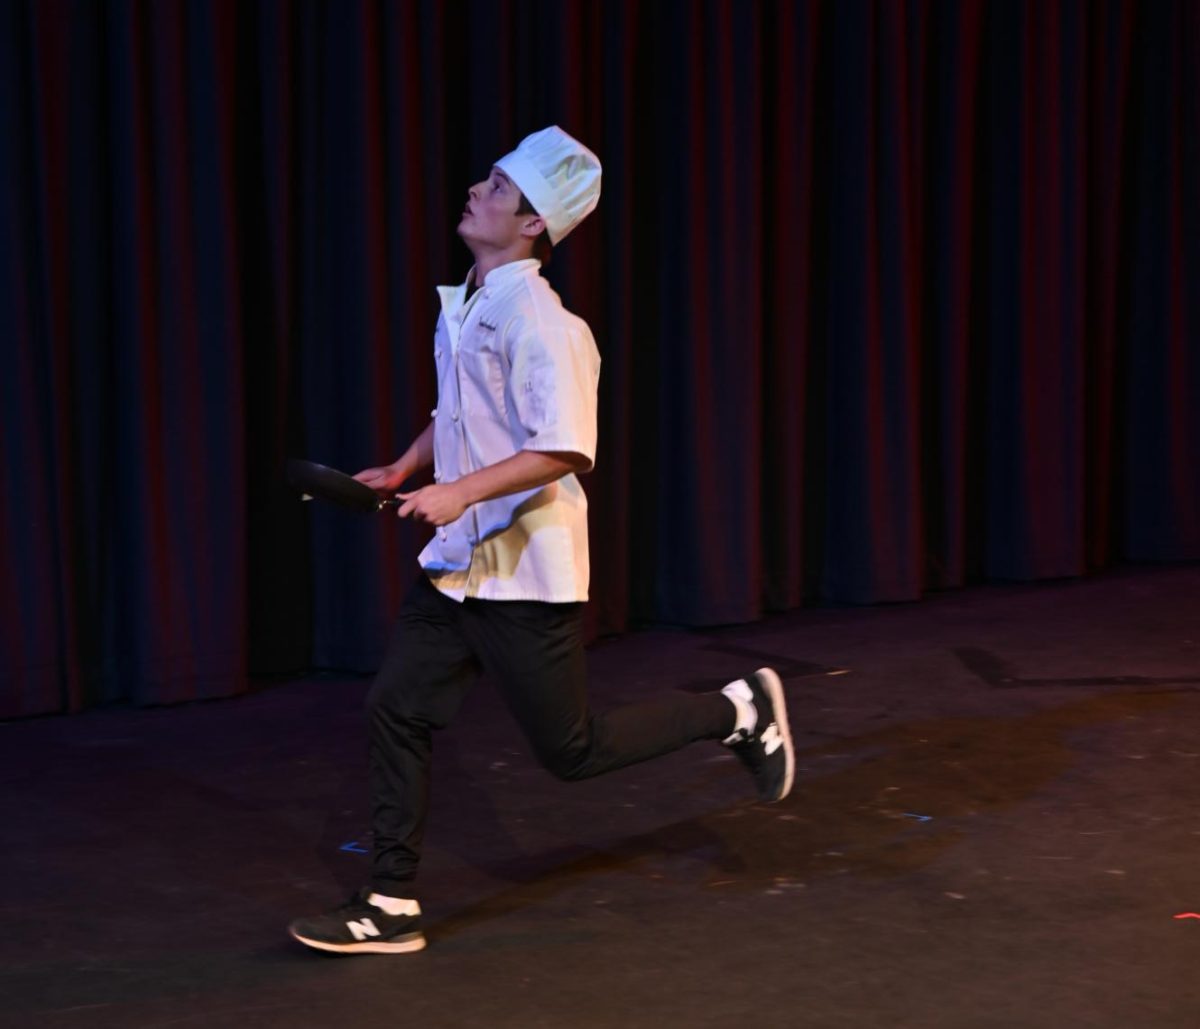 Senior Cameron Hickert tilts his head upwards, running across the stage as he pretends to be a chef. Mr. Longhorn contestants prepared for their acts across three practices. “I’m excited to perform with my friends and have a lot of fun. It’s senior year, so I’m trying to get more involved with stuff this year. I’m putting on a little dance with my friends, [seniors] Caden Keller and Justin Grove,” Hickert said.